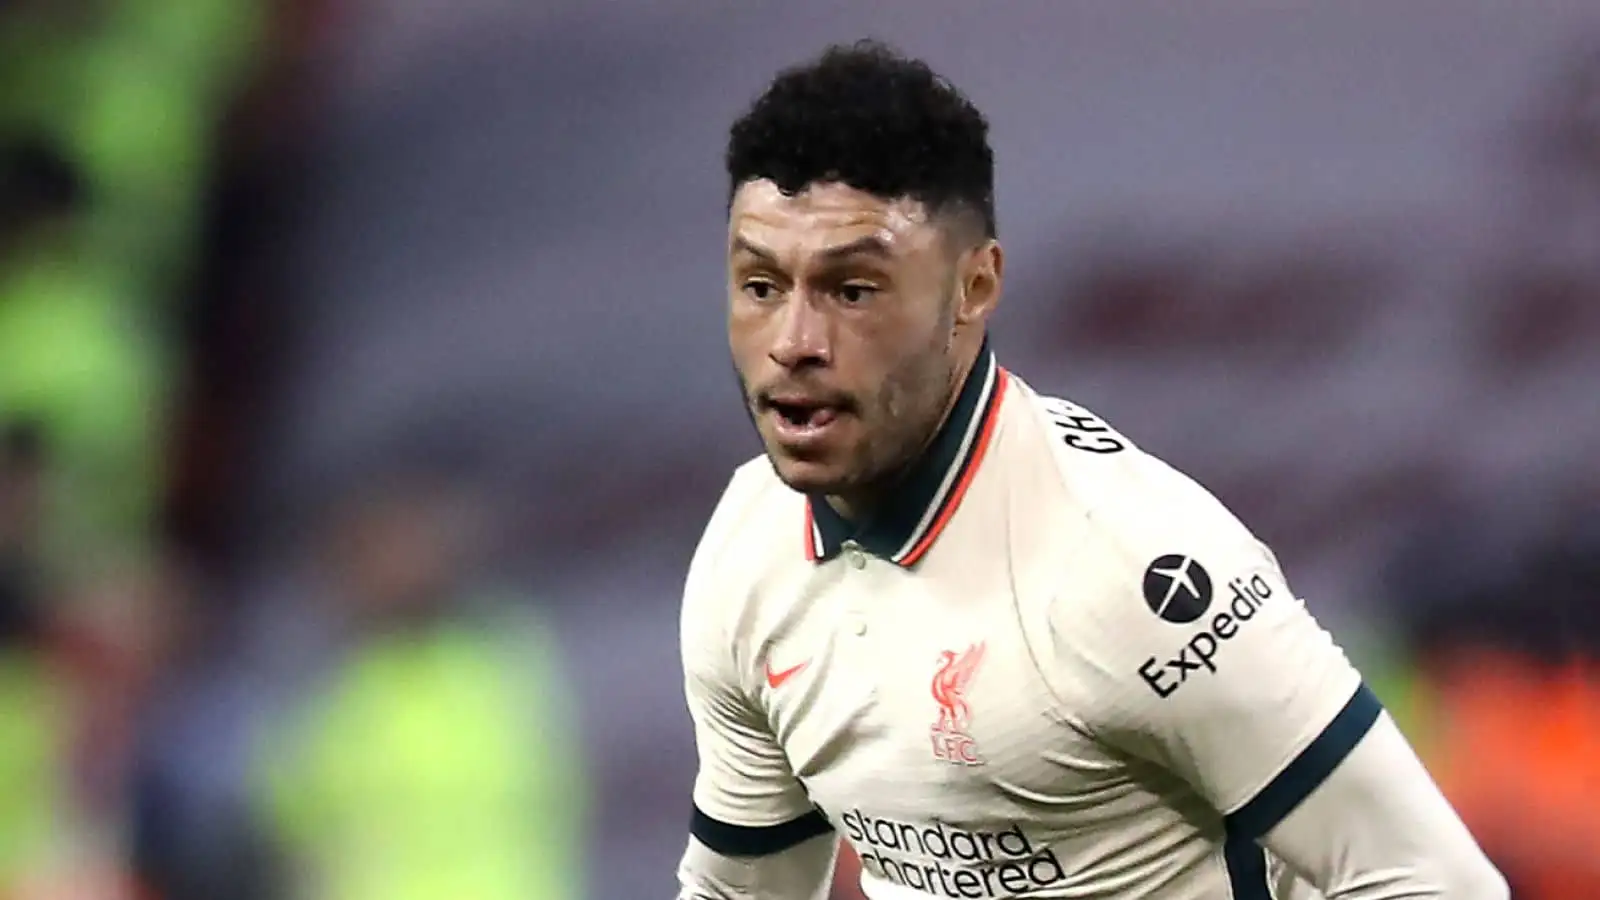 Alex Oxlade-Chamberlain on the ball for Liverpool